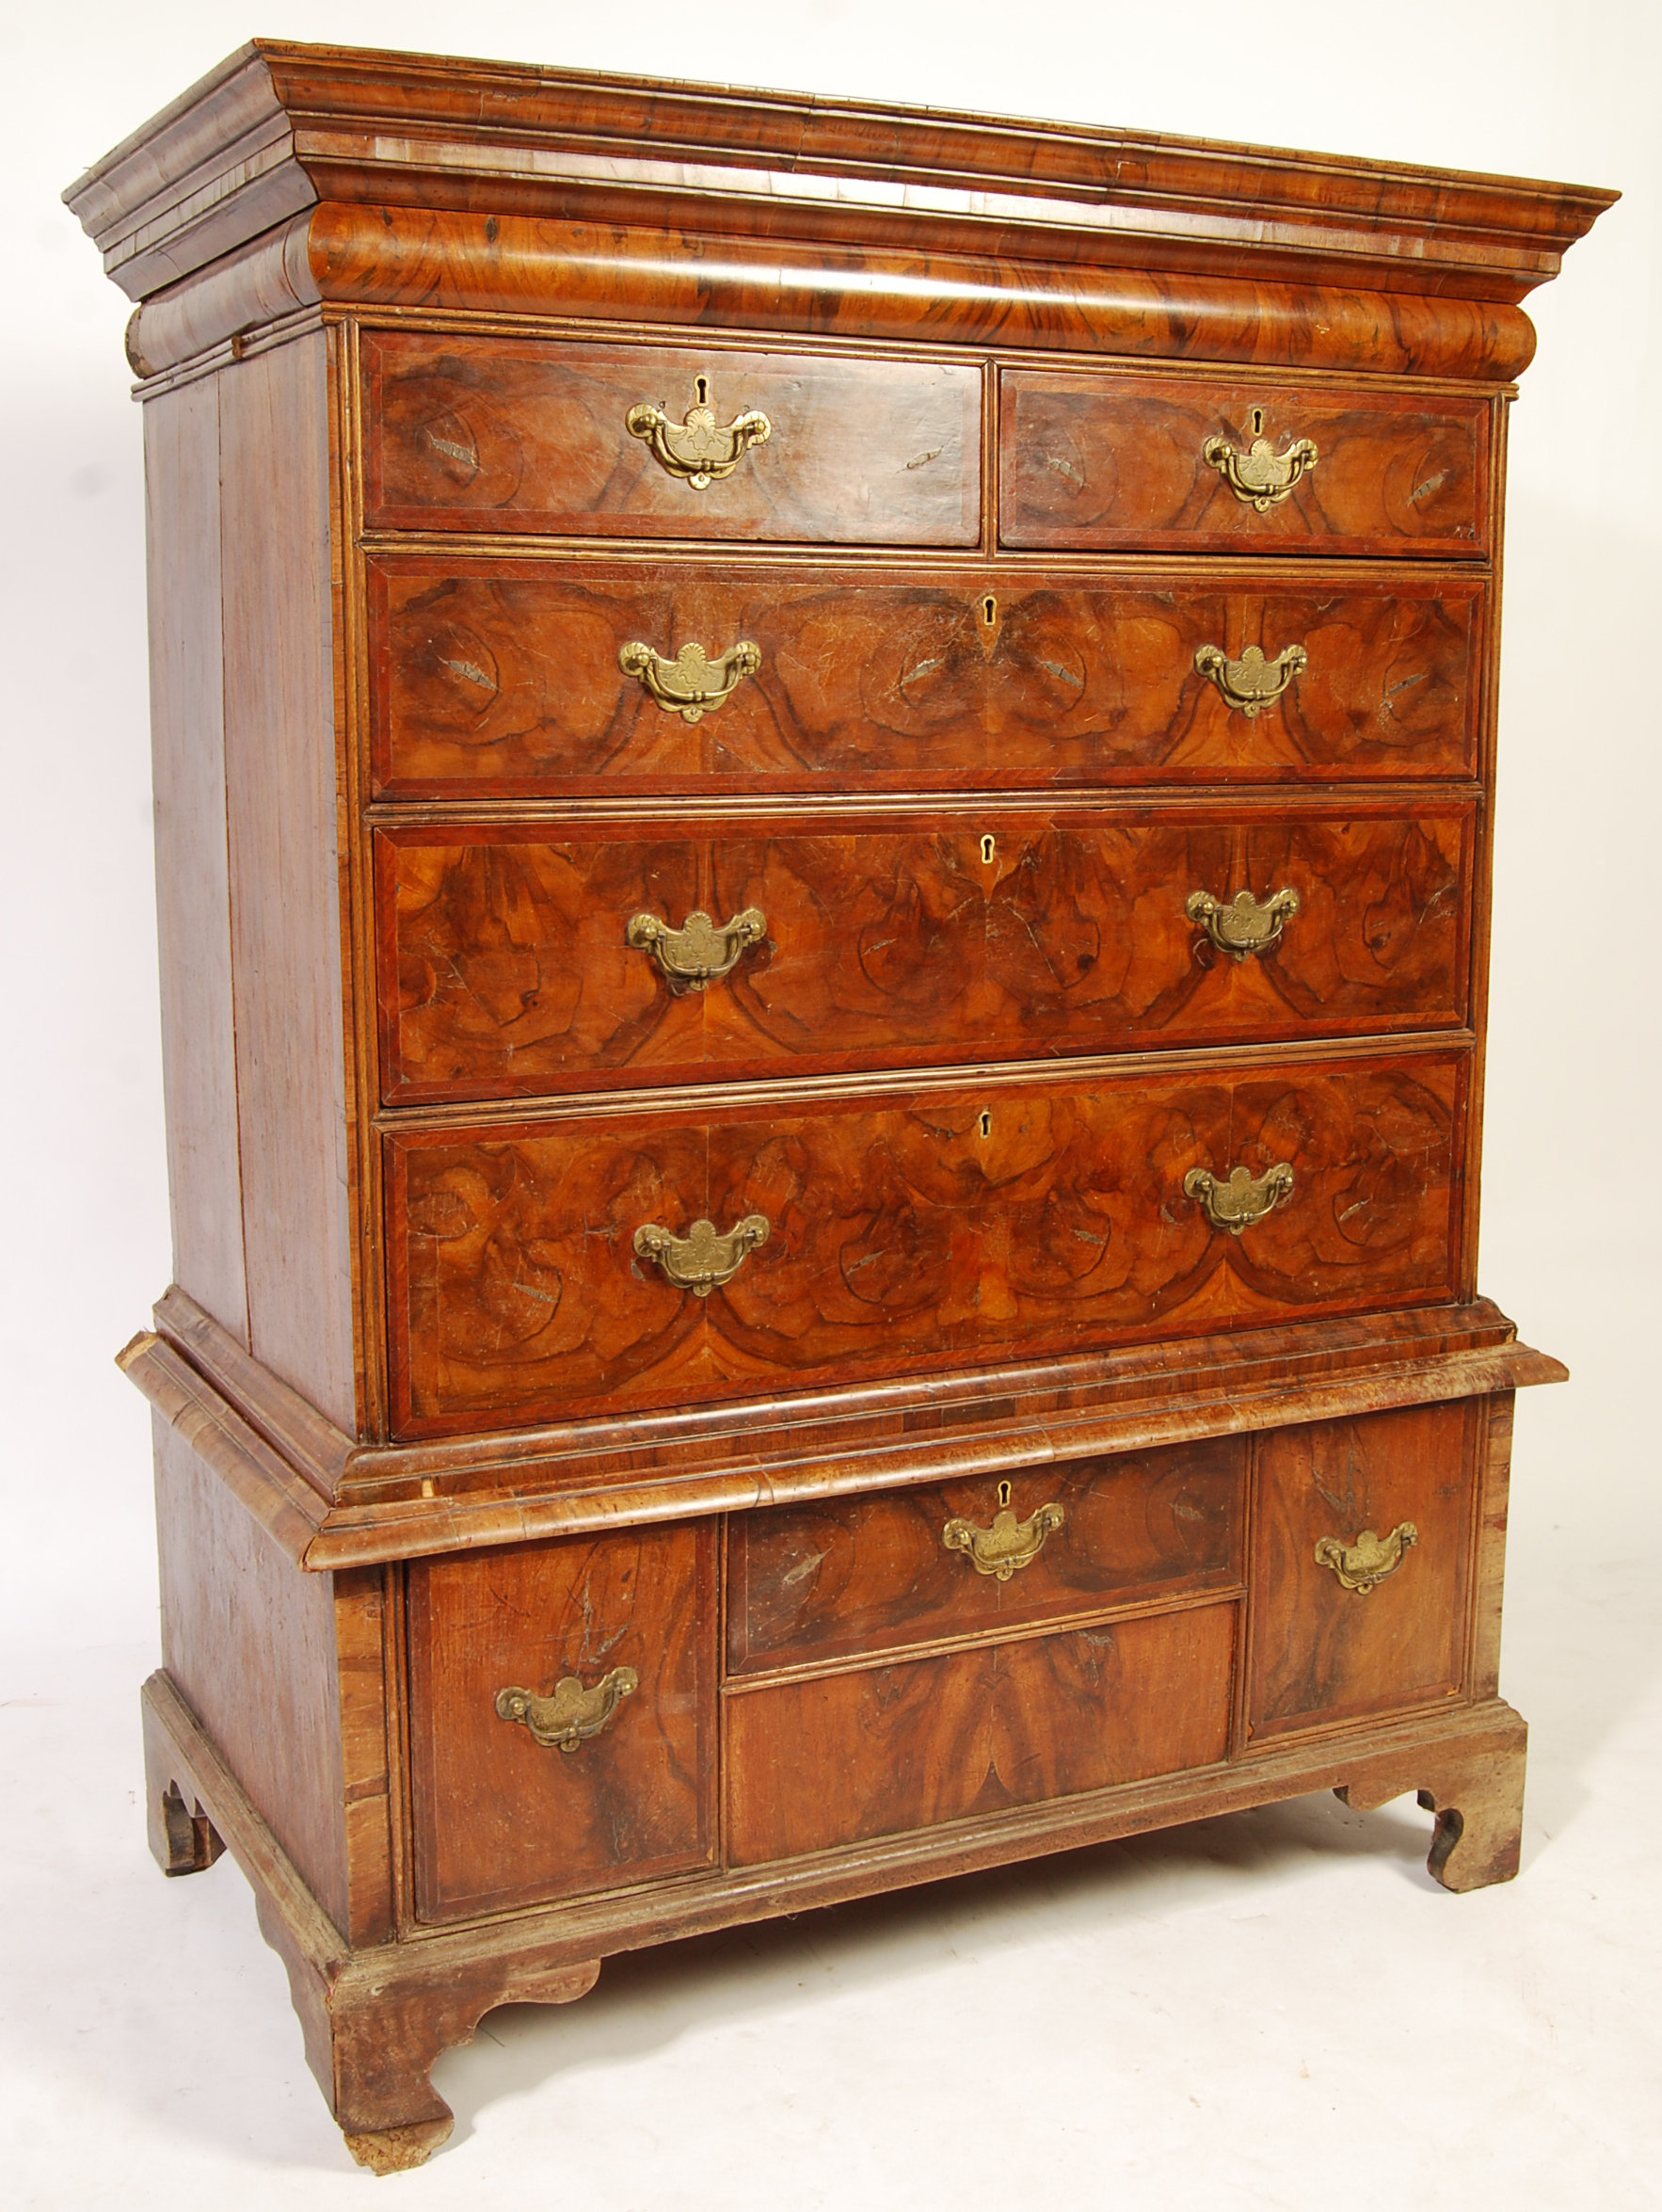 LATE 17TH / 18TH CENTURY WALNUT CHEST ON STAND